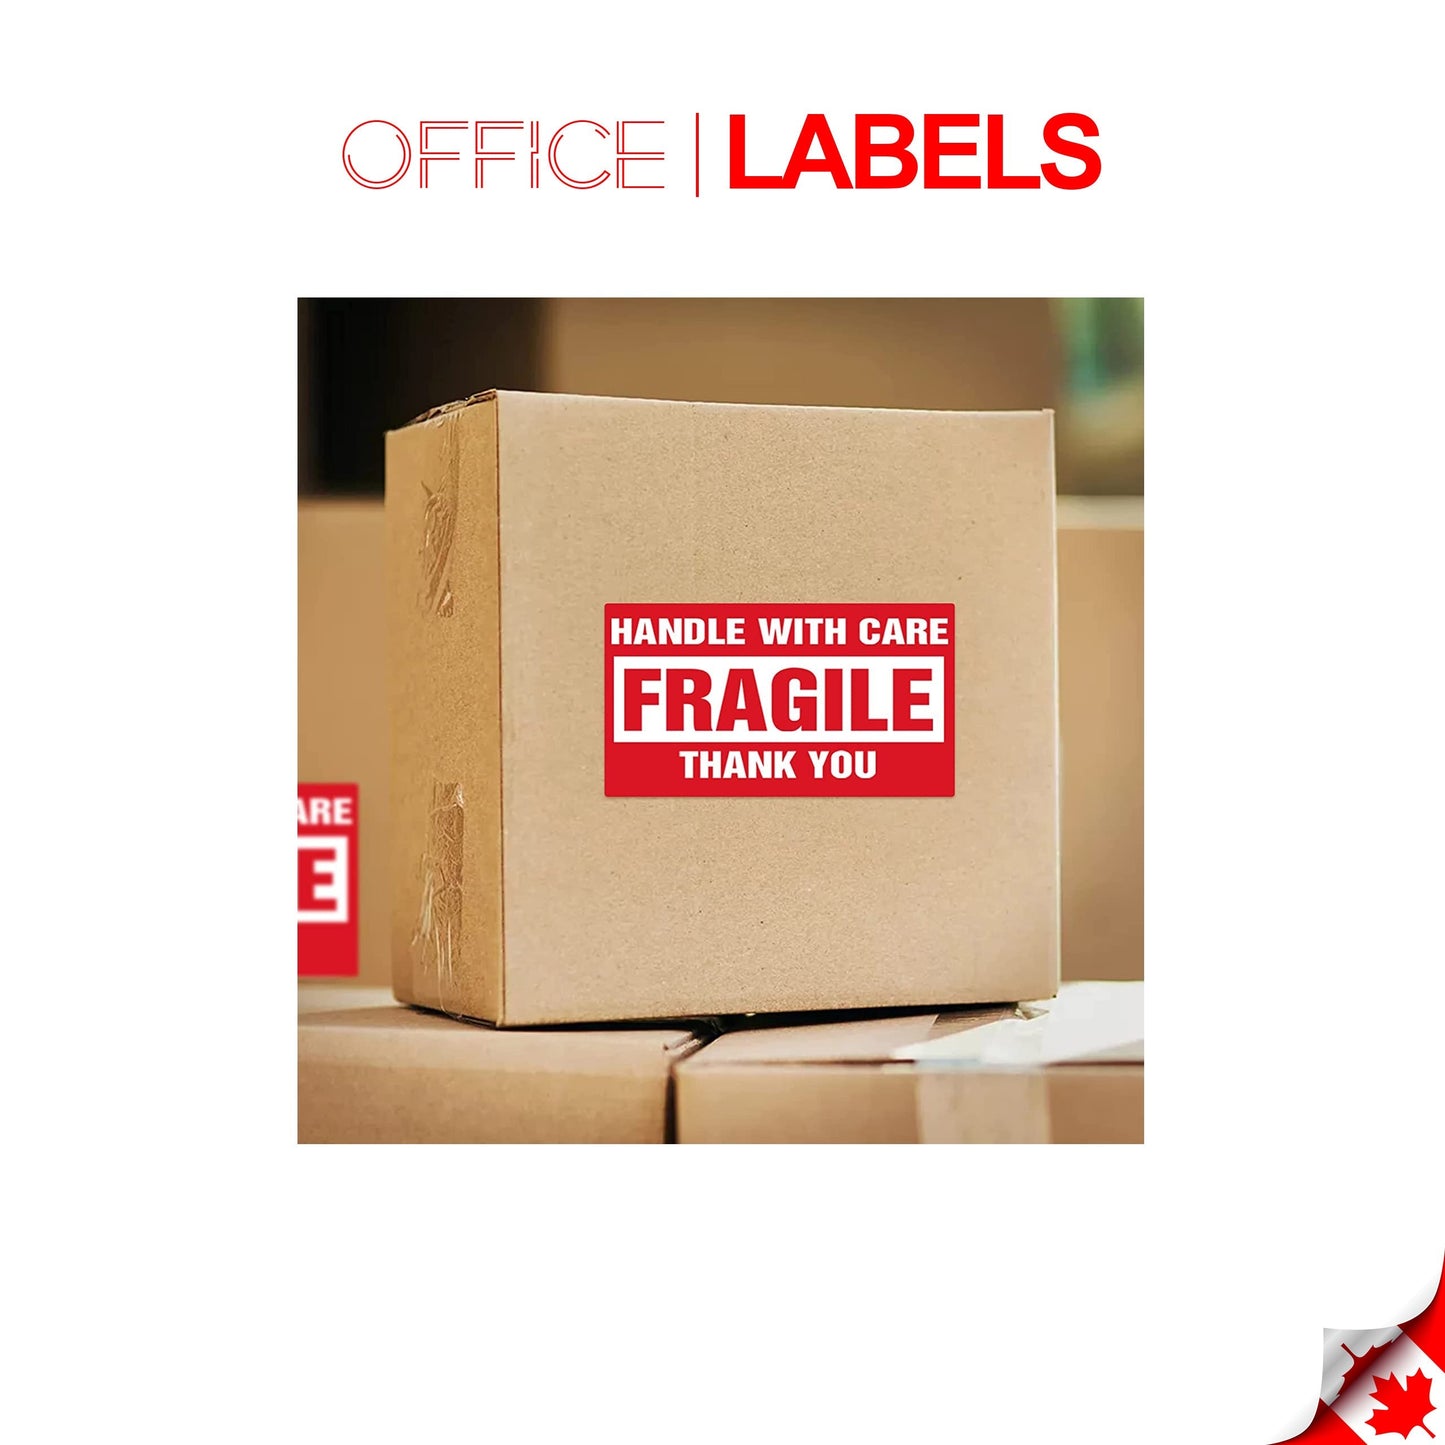 10 Rolls of Fragile-Handle with Care Stickers 2" x 3"